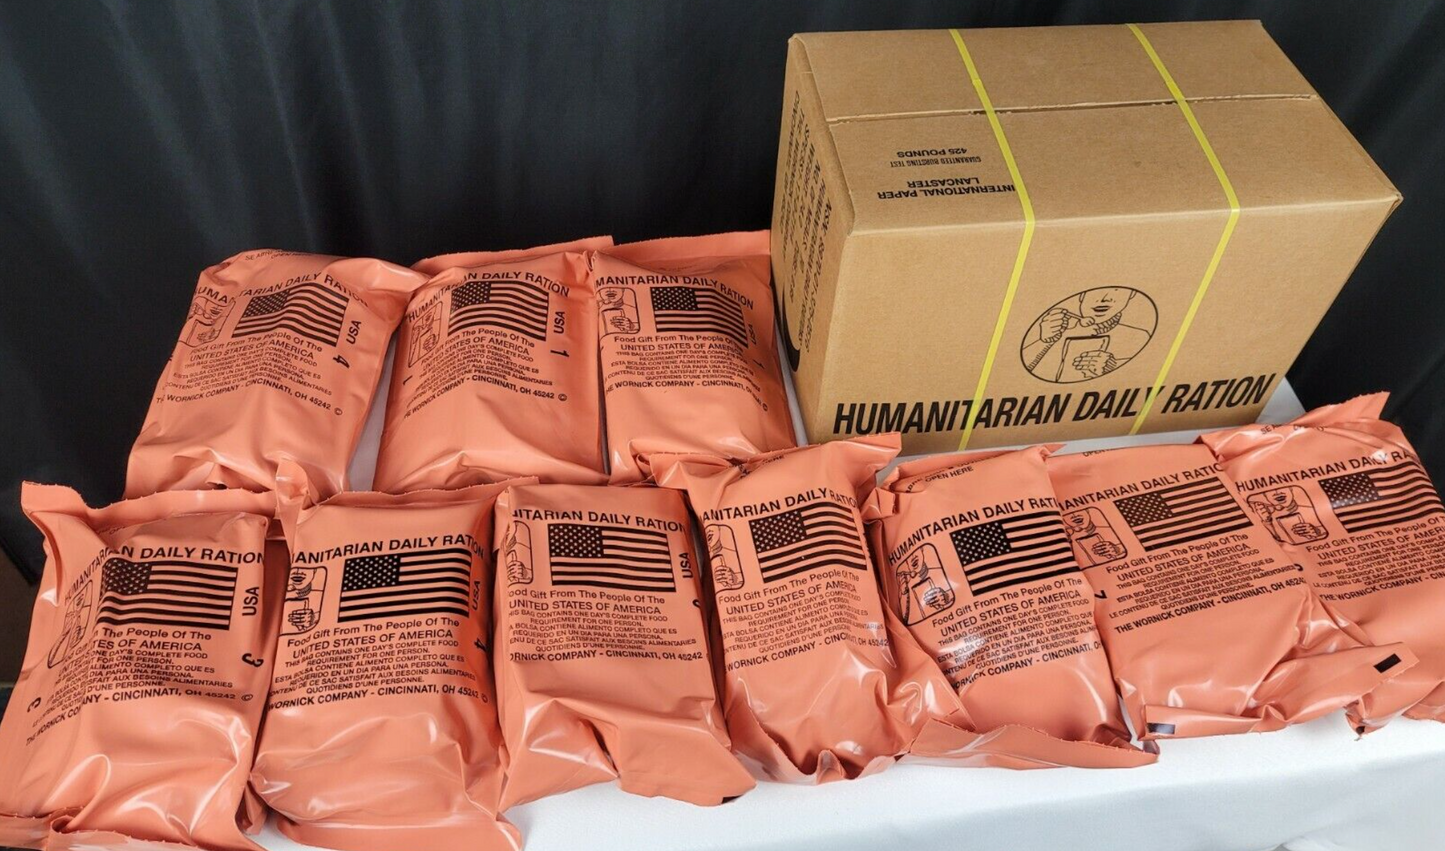 Case of Humanitarian Daily Ration MRE (Meal, Ready To Eat) - Inspection date of 2022